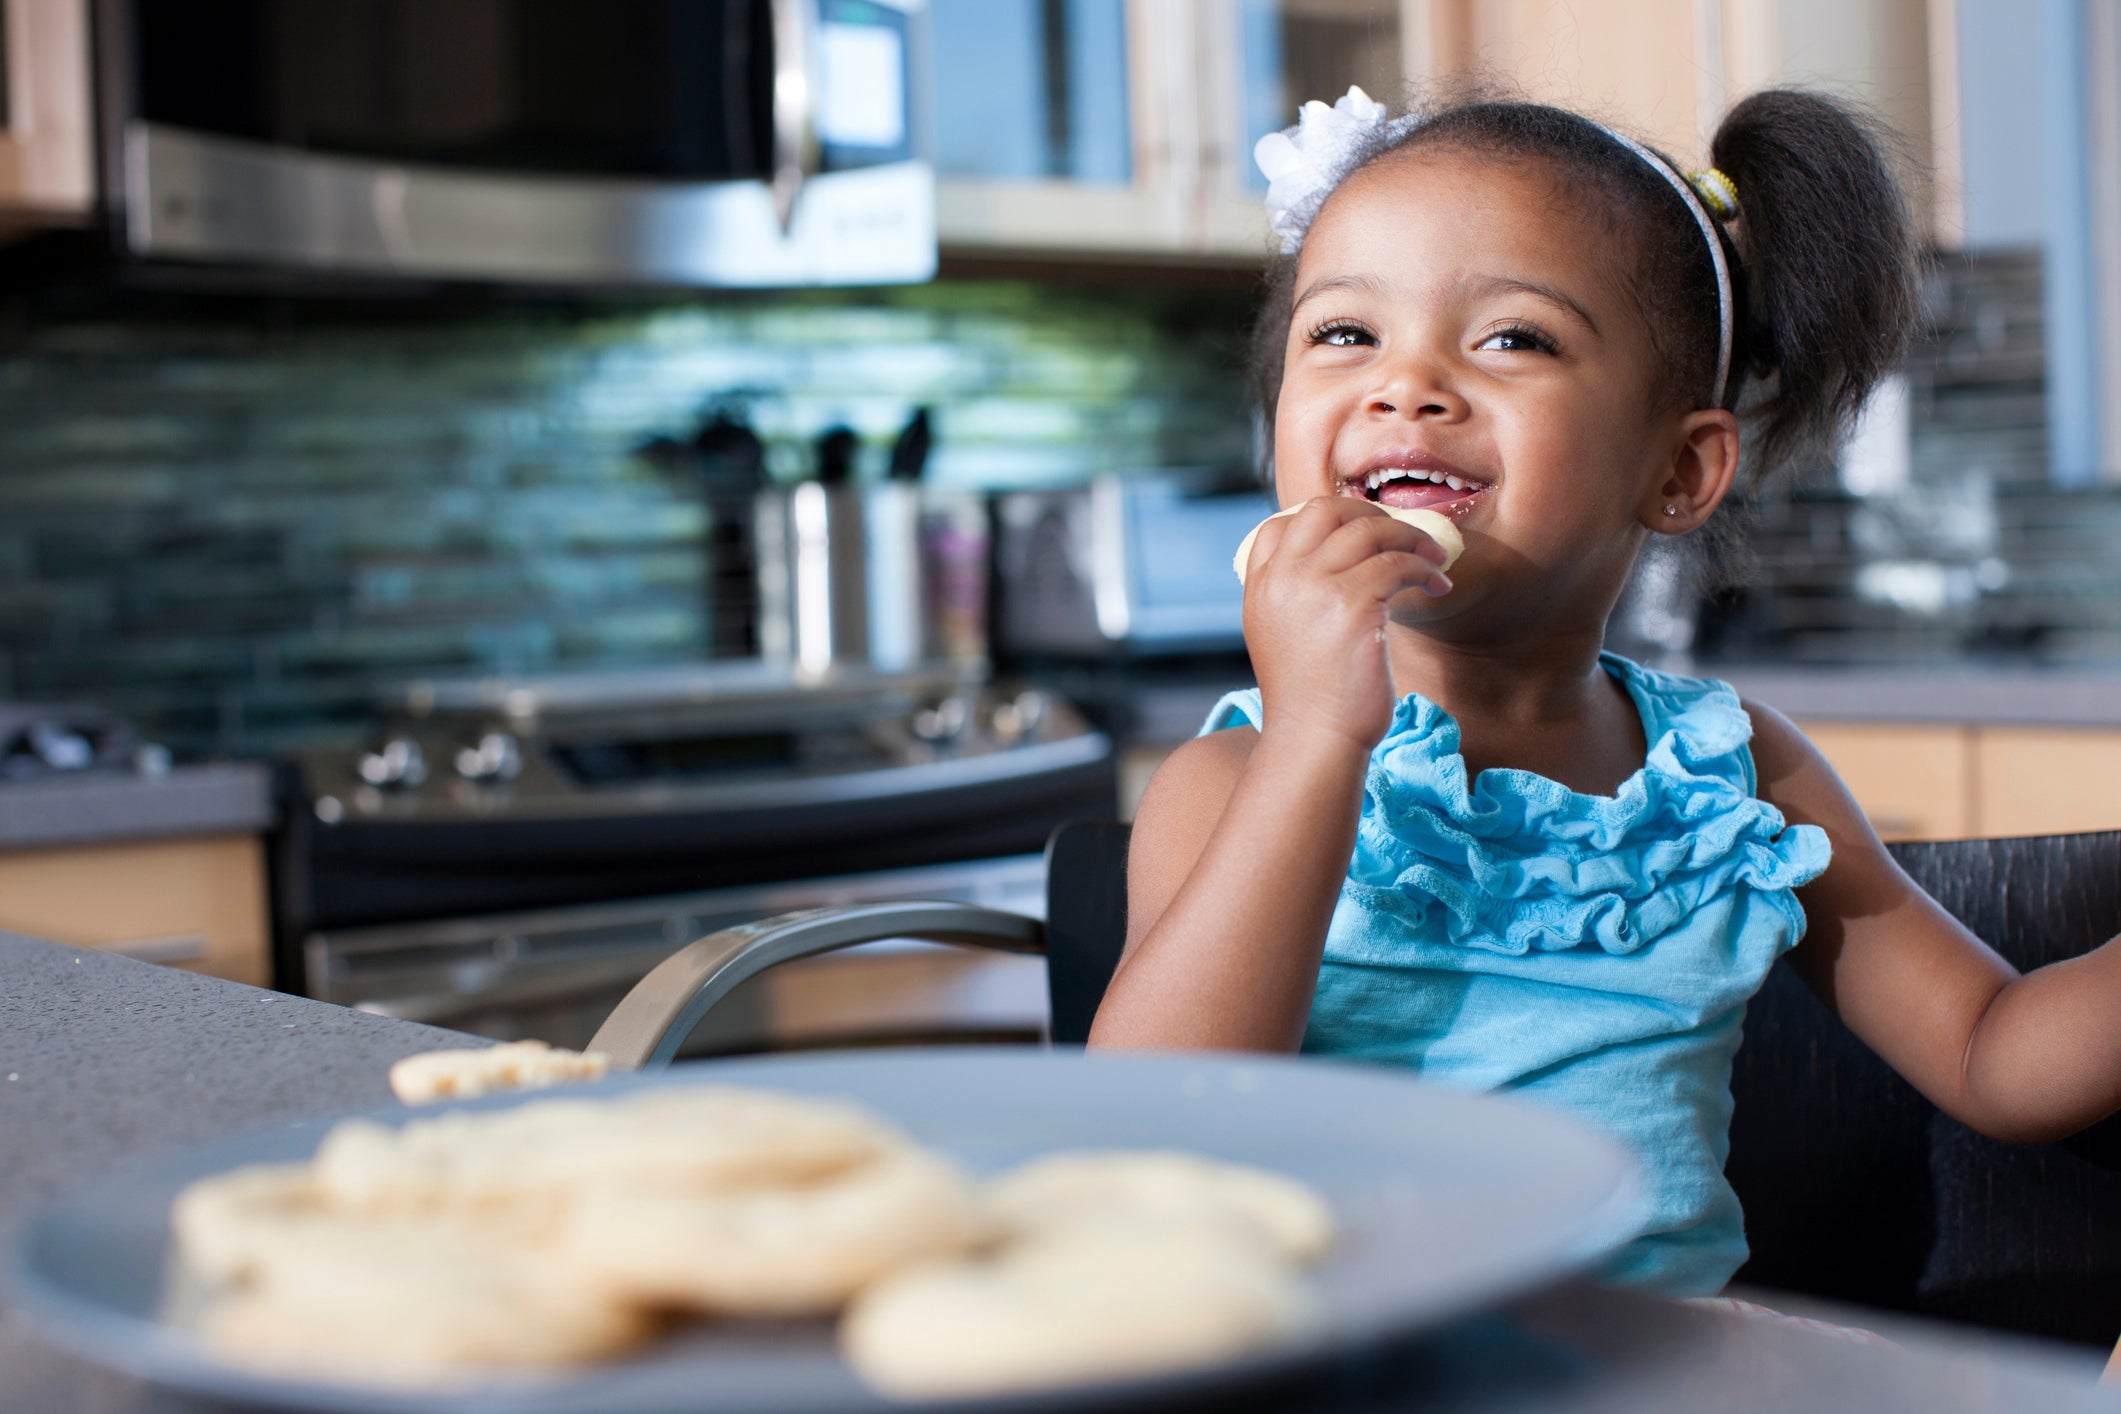 A smilling girl eating a cookie.